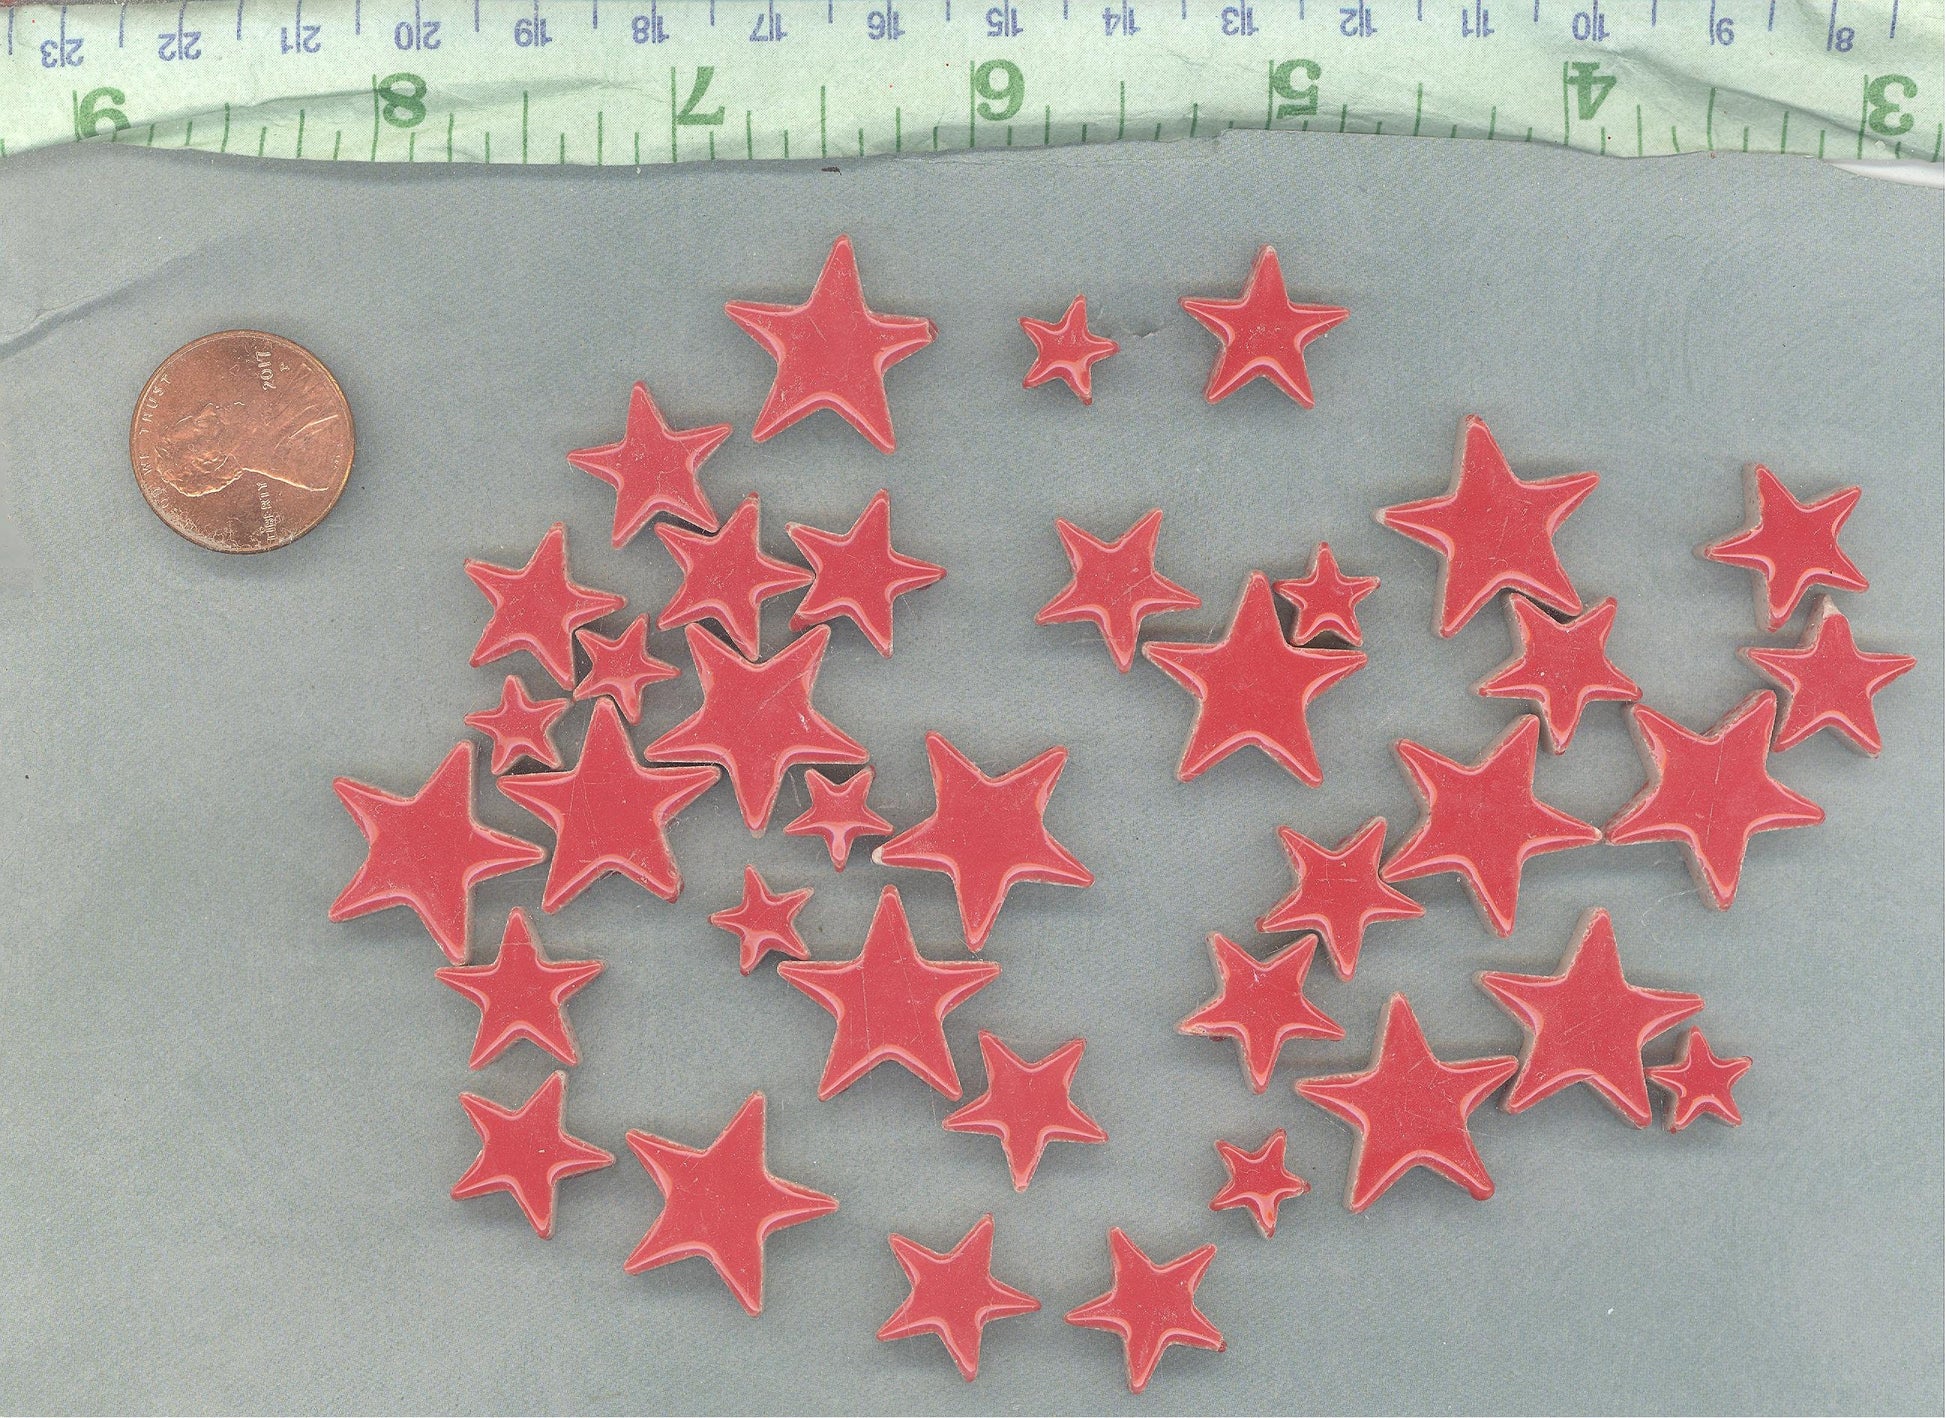 Red Stars Mosaic Tiles - 50g Ceramic in Mix of 3 Sizes - 20mm, 15mm, 10mm - Poppy Red